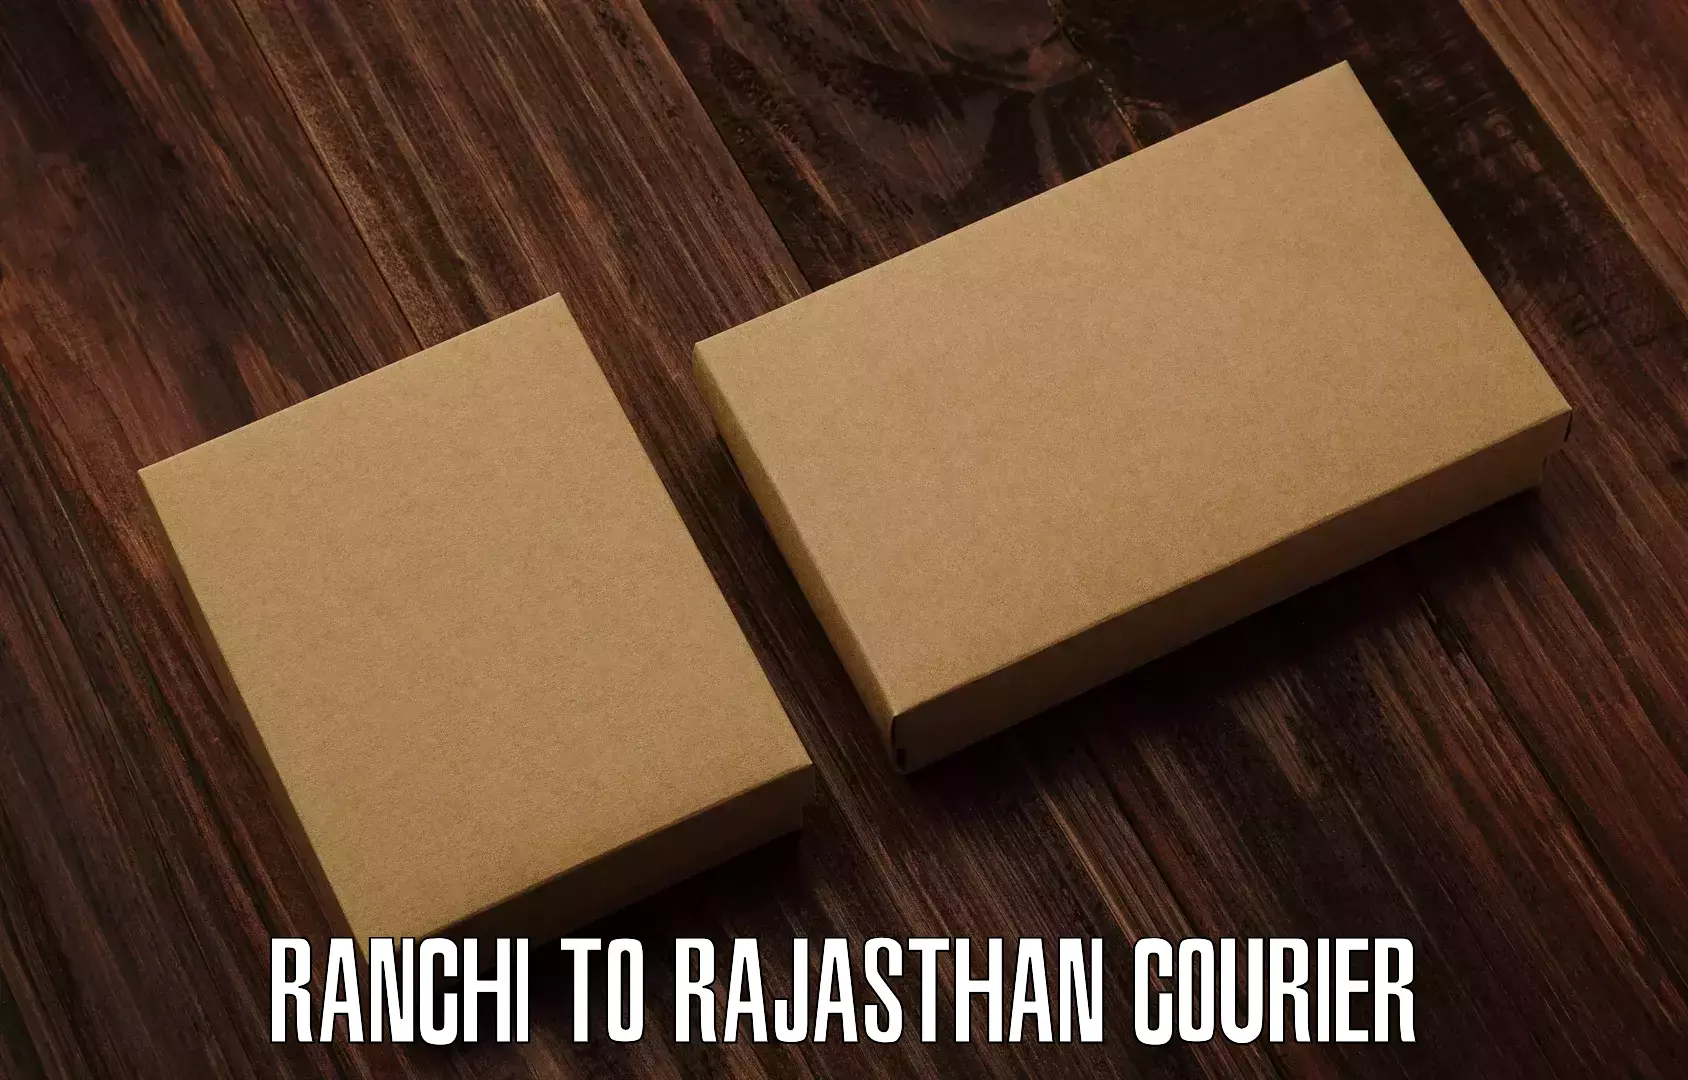 Automated parcel services Ranchi to Rajsamand